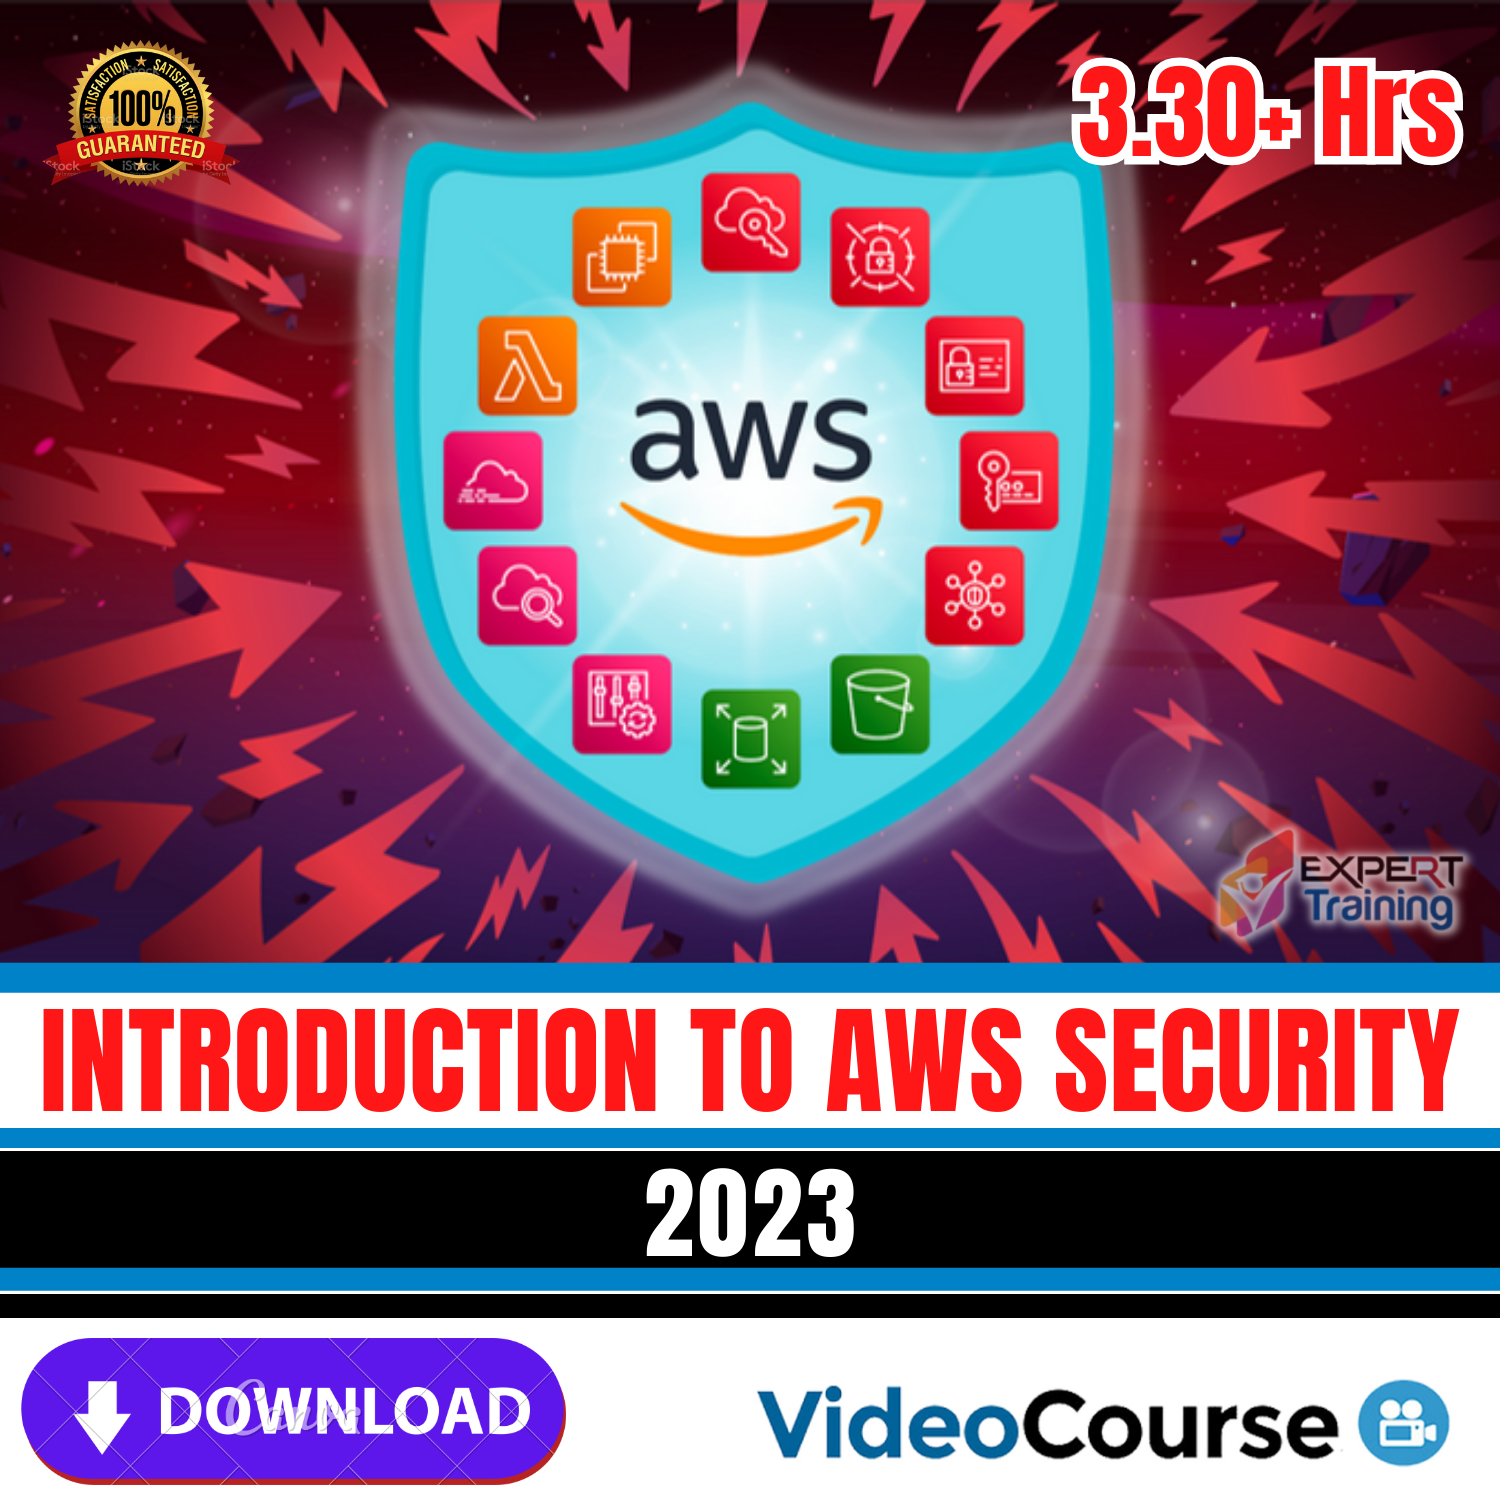 Introduction to AWS Security 2023